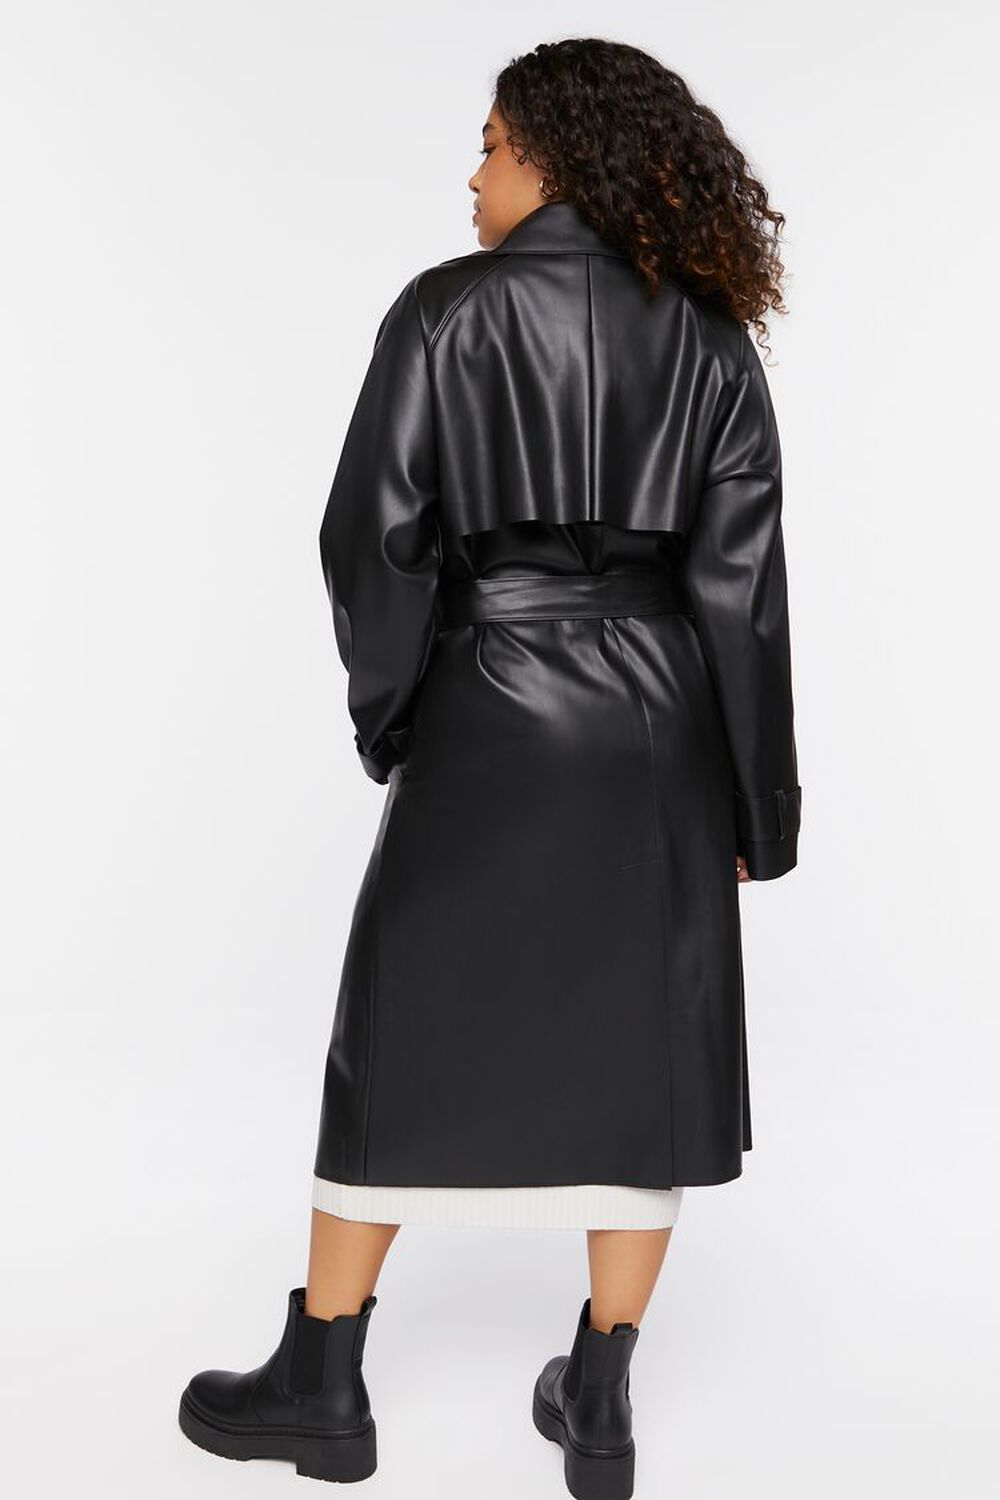 BLACK Plus Size Faux Leather Trench Coat, image 3